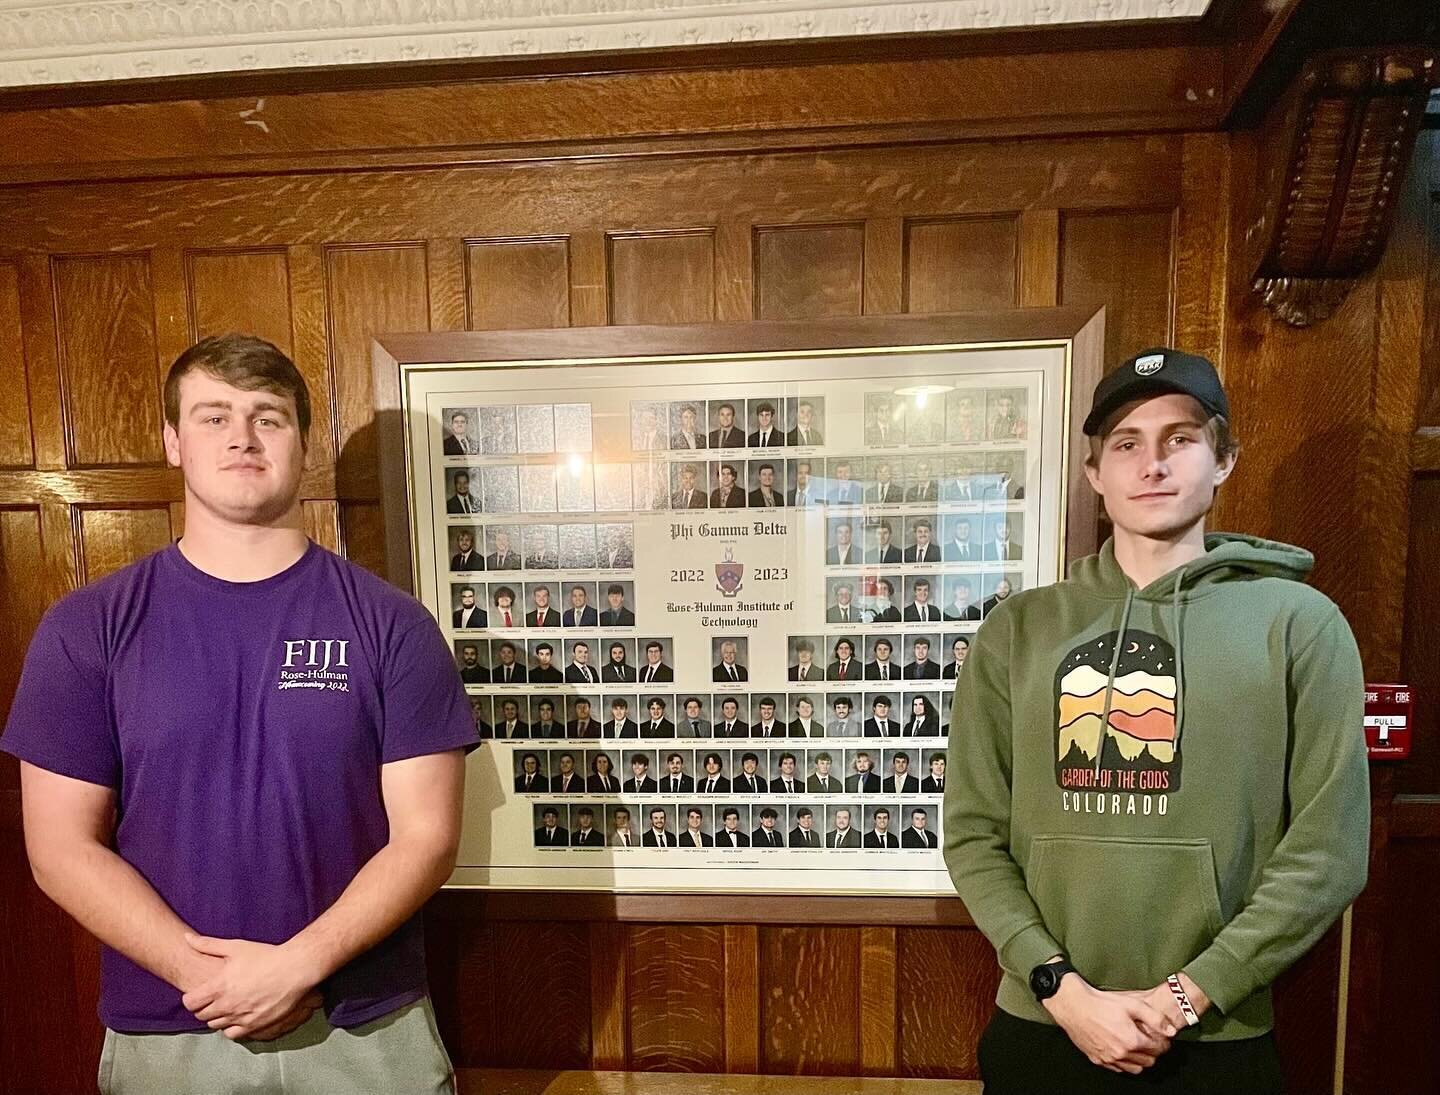 MAKING the GRADE

While our chapter has always focused on scholarship, our grades this year have so far been outstanding.
Much credit needs to go to our Scholarship co-chairs DYLAN PAGE and MORGAN STRATTON.

Winter Quarter just ended and the chapter 